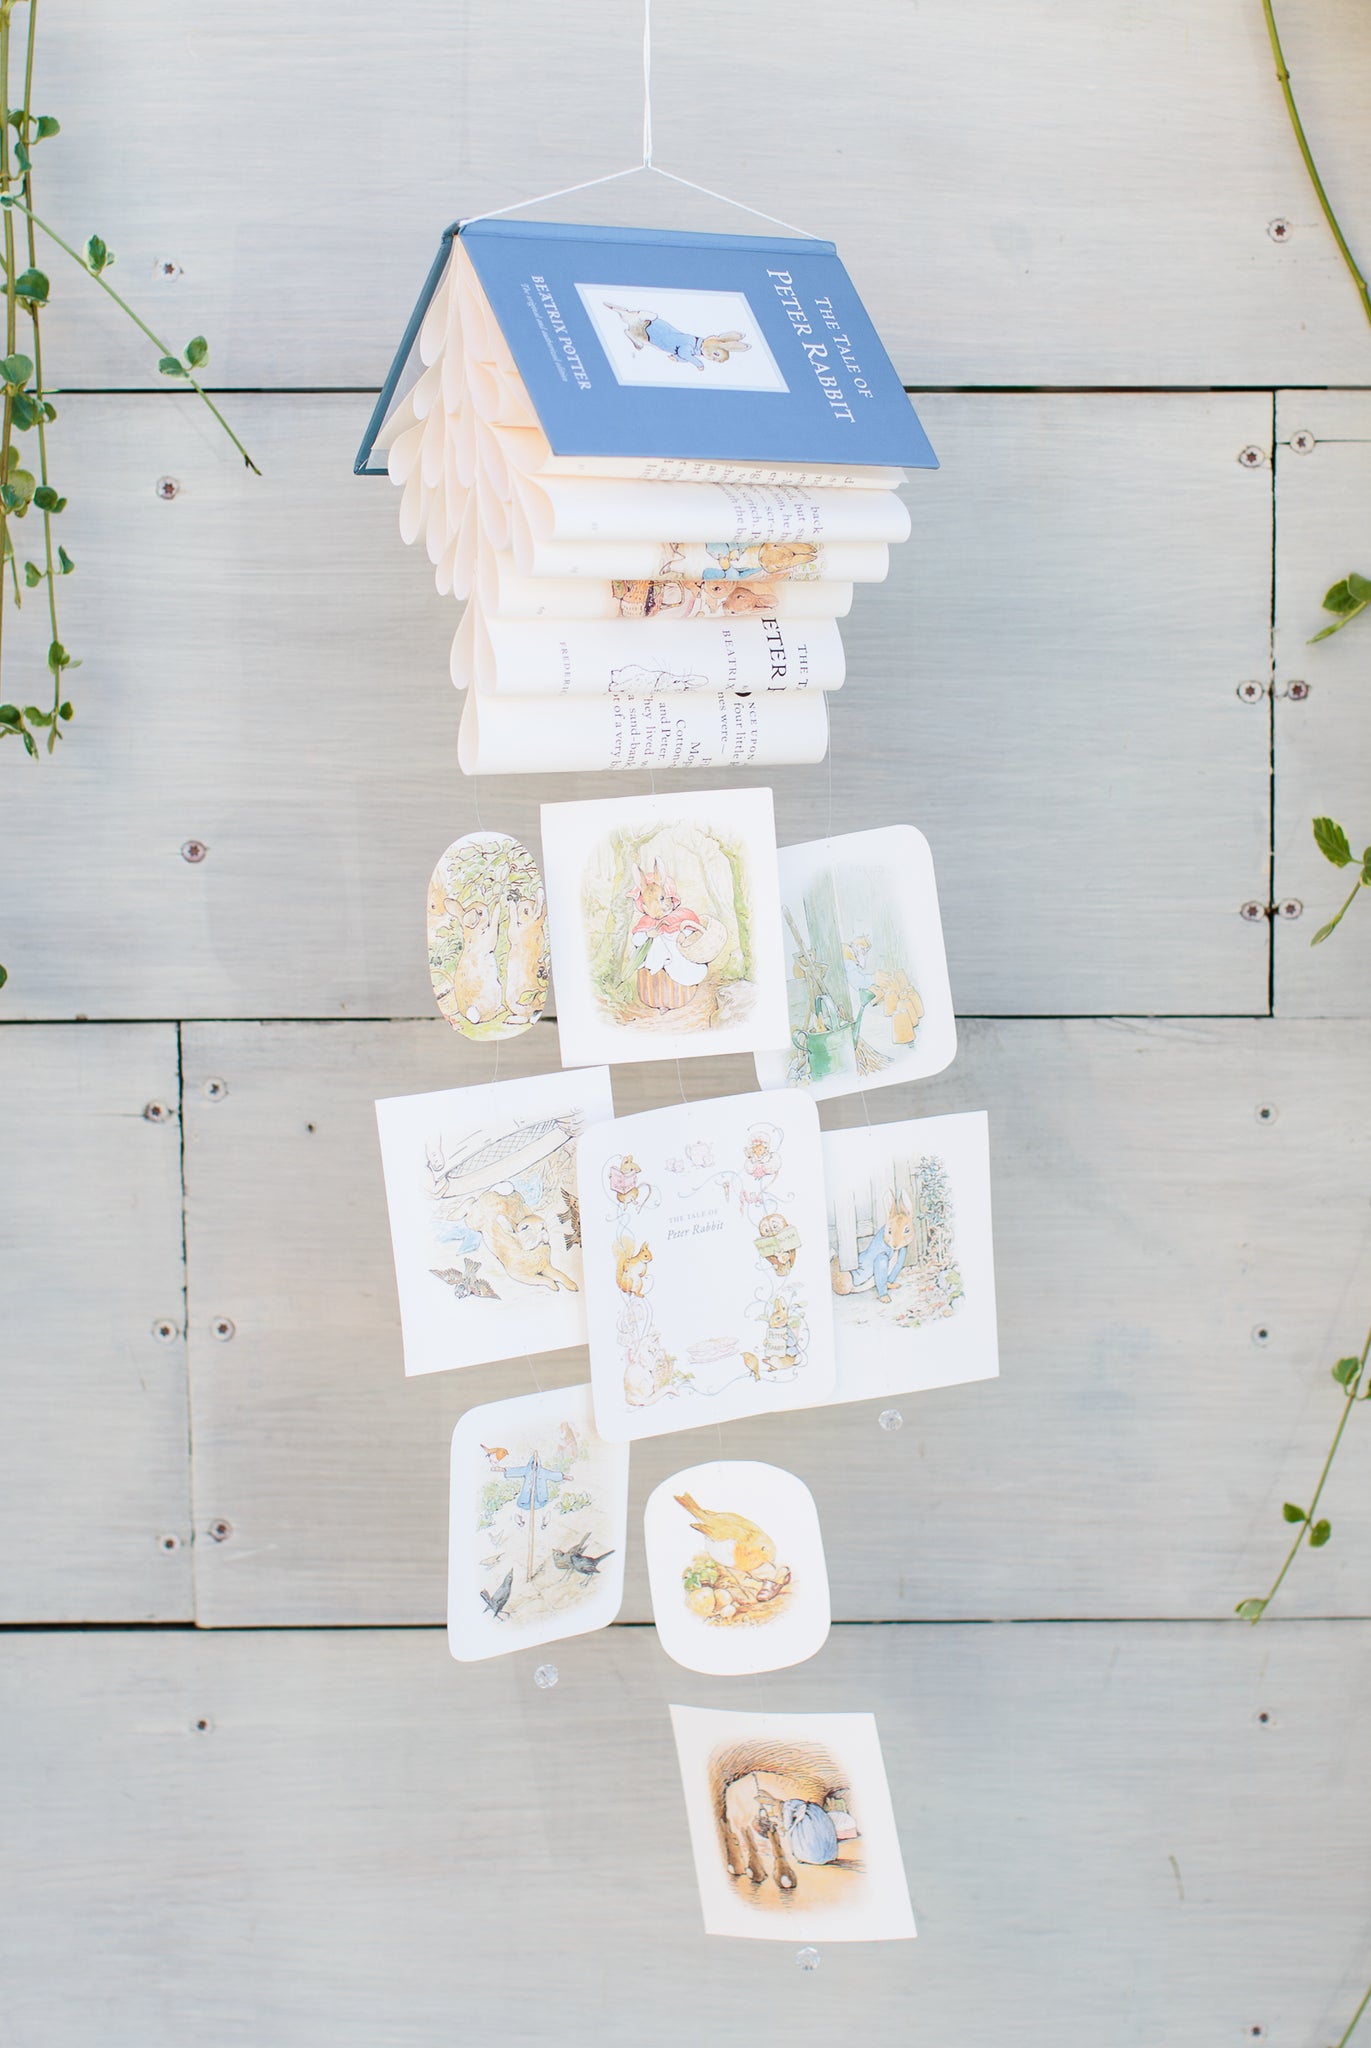 Peter Rabbit themed party DIY decoration crafted from a book.